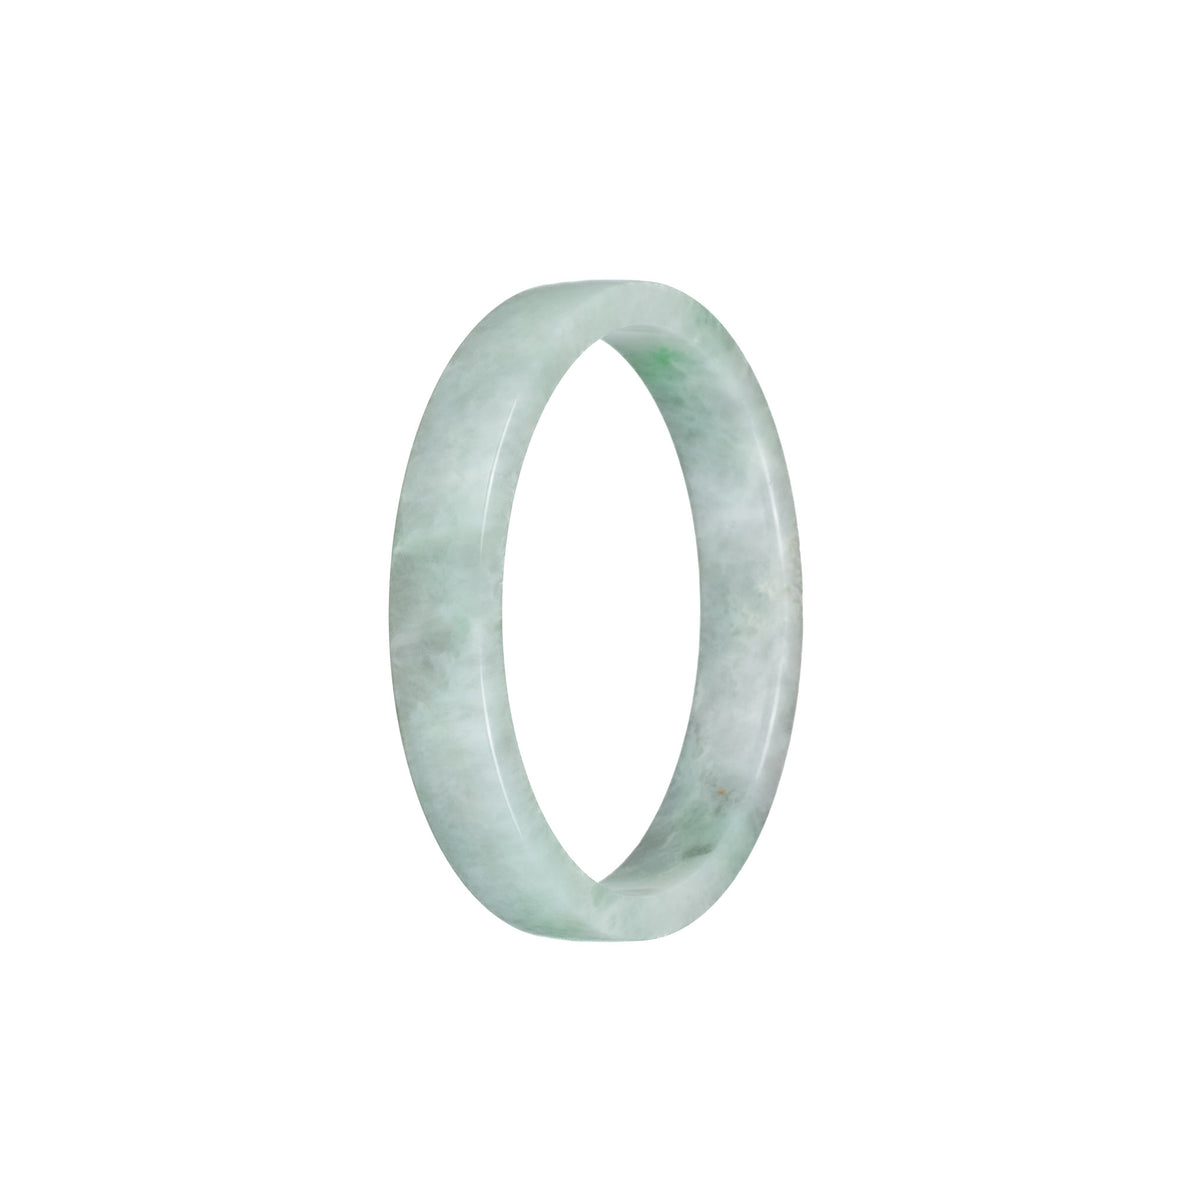 Real Grade A Pale Green with Green Pattern Jade Bangle - 52mm Flat